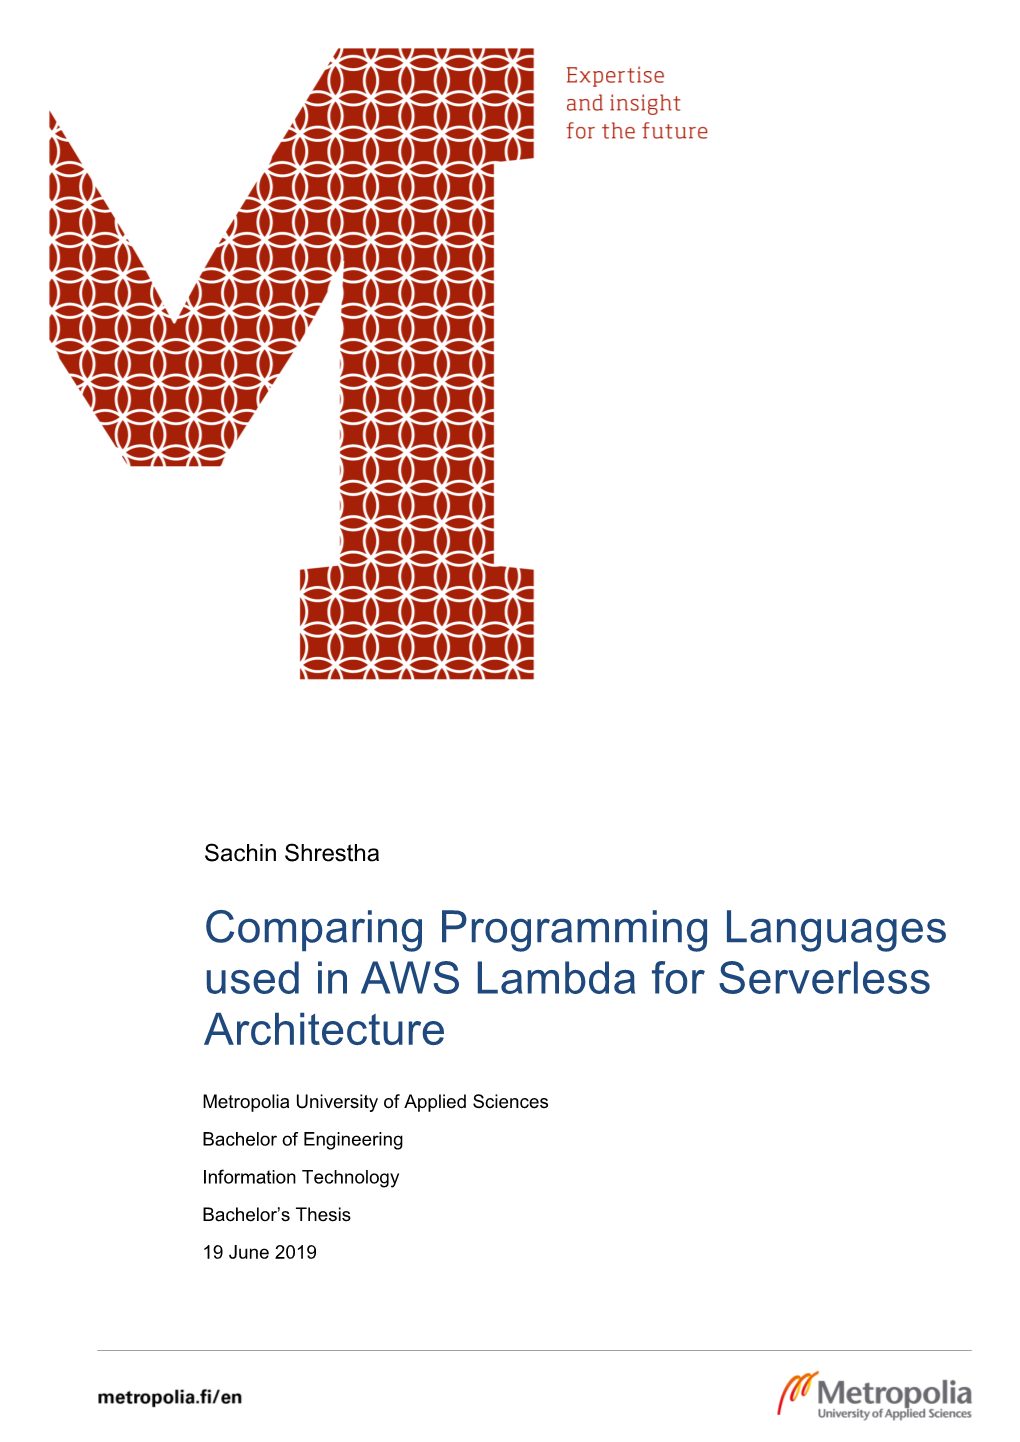 Comparing Programming Languages Used in AWS Lambda for Serverless Architecture